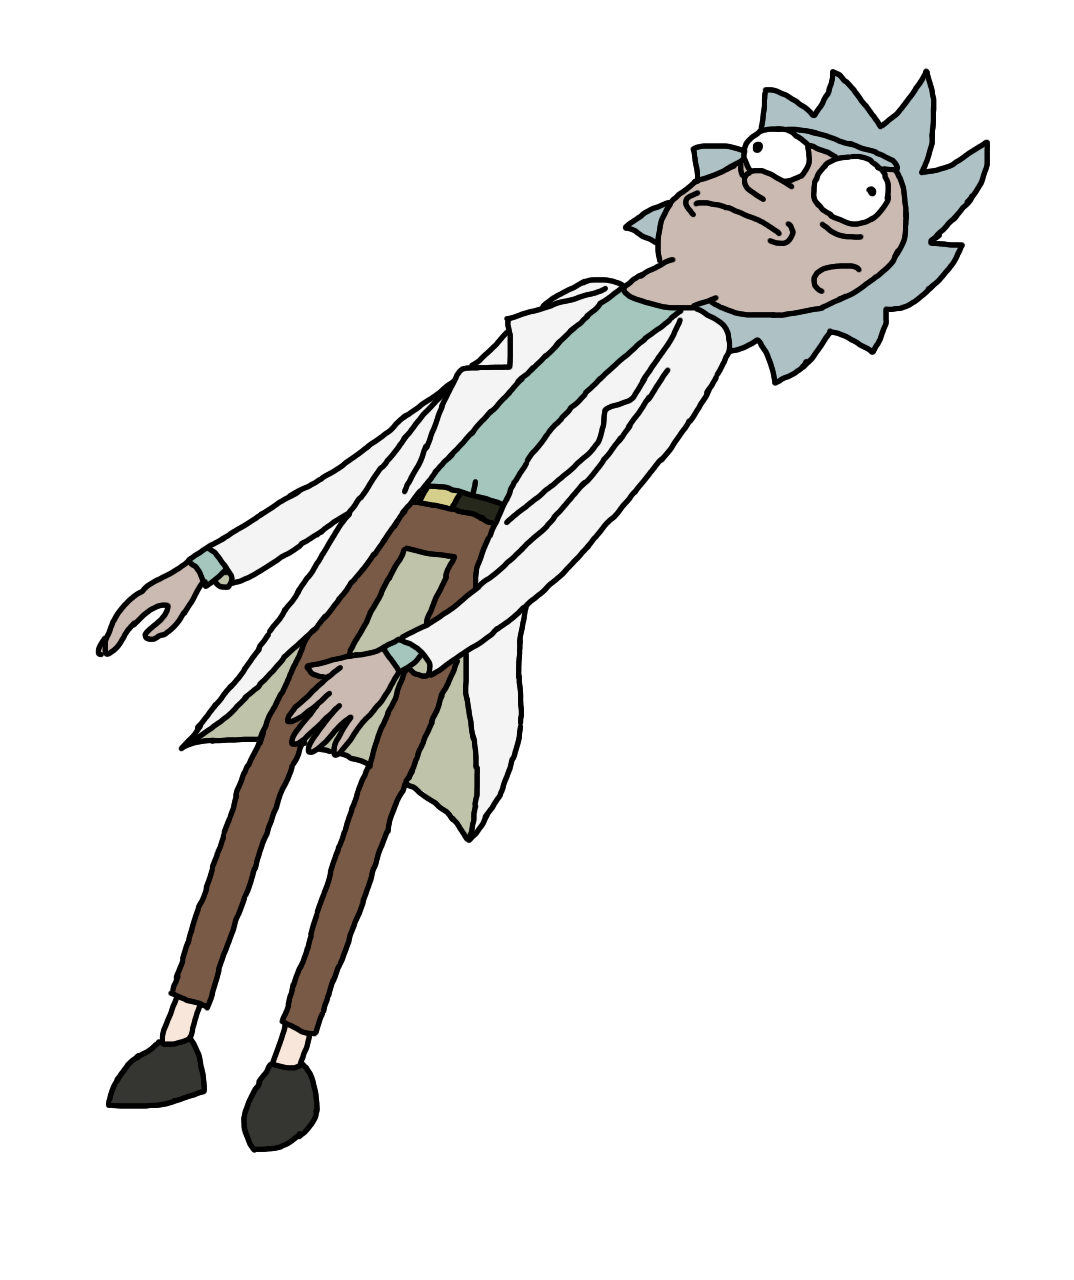 rick and morty, here png punched rick thebrainmuncher rick and #30971